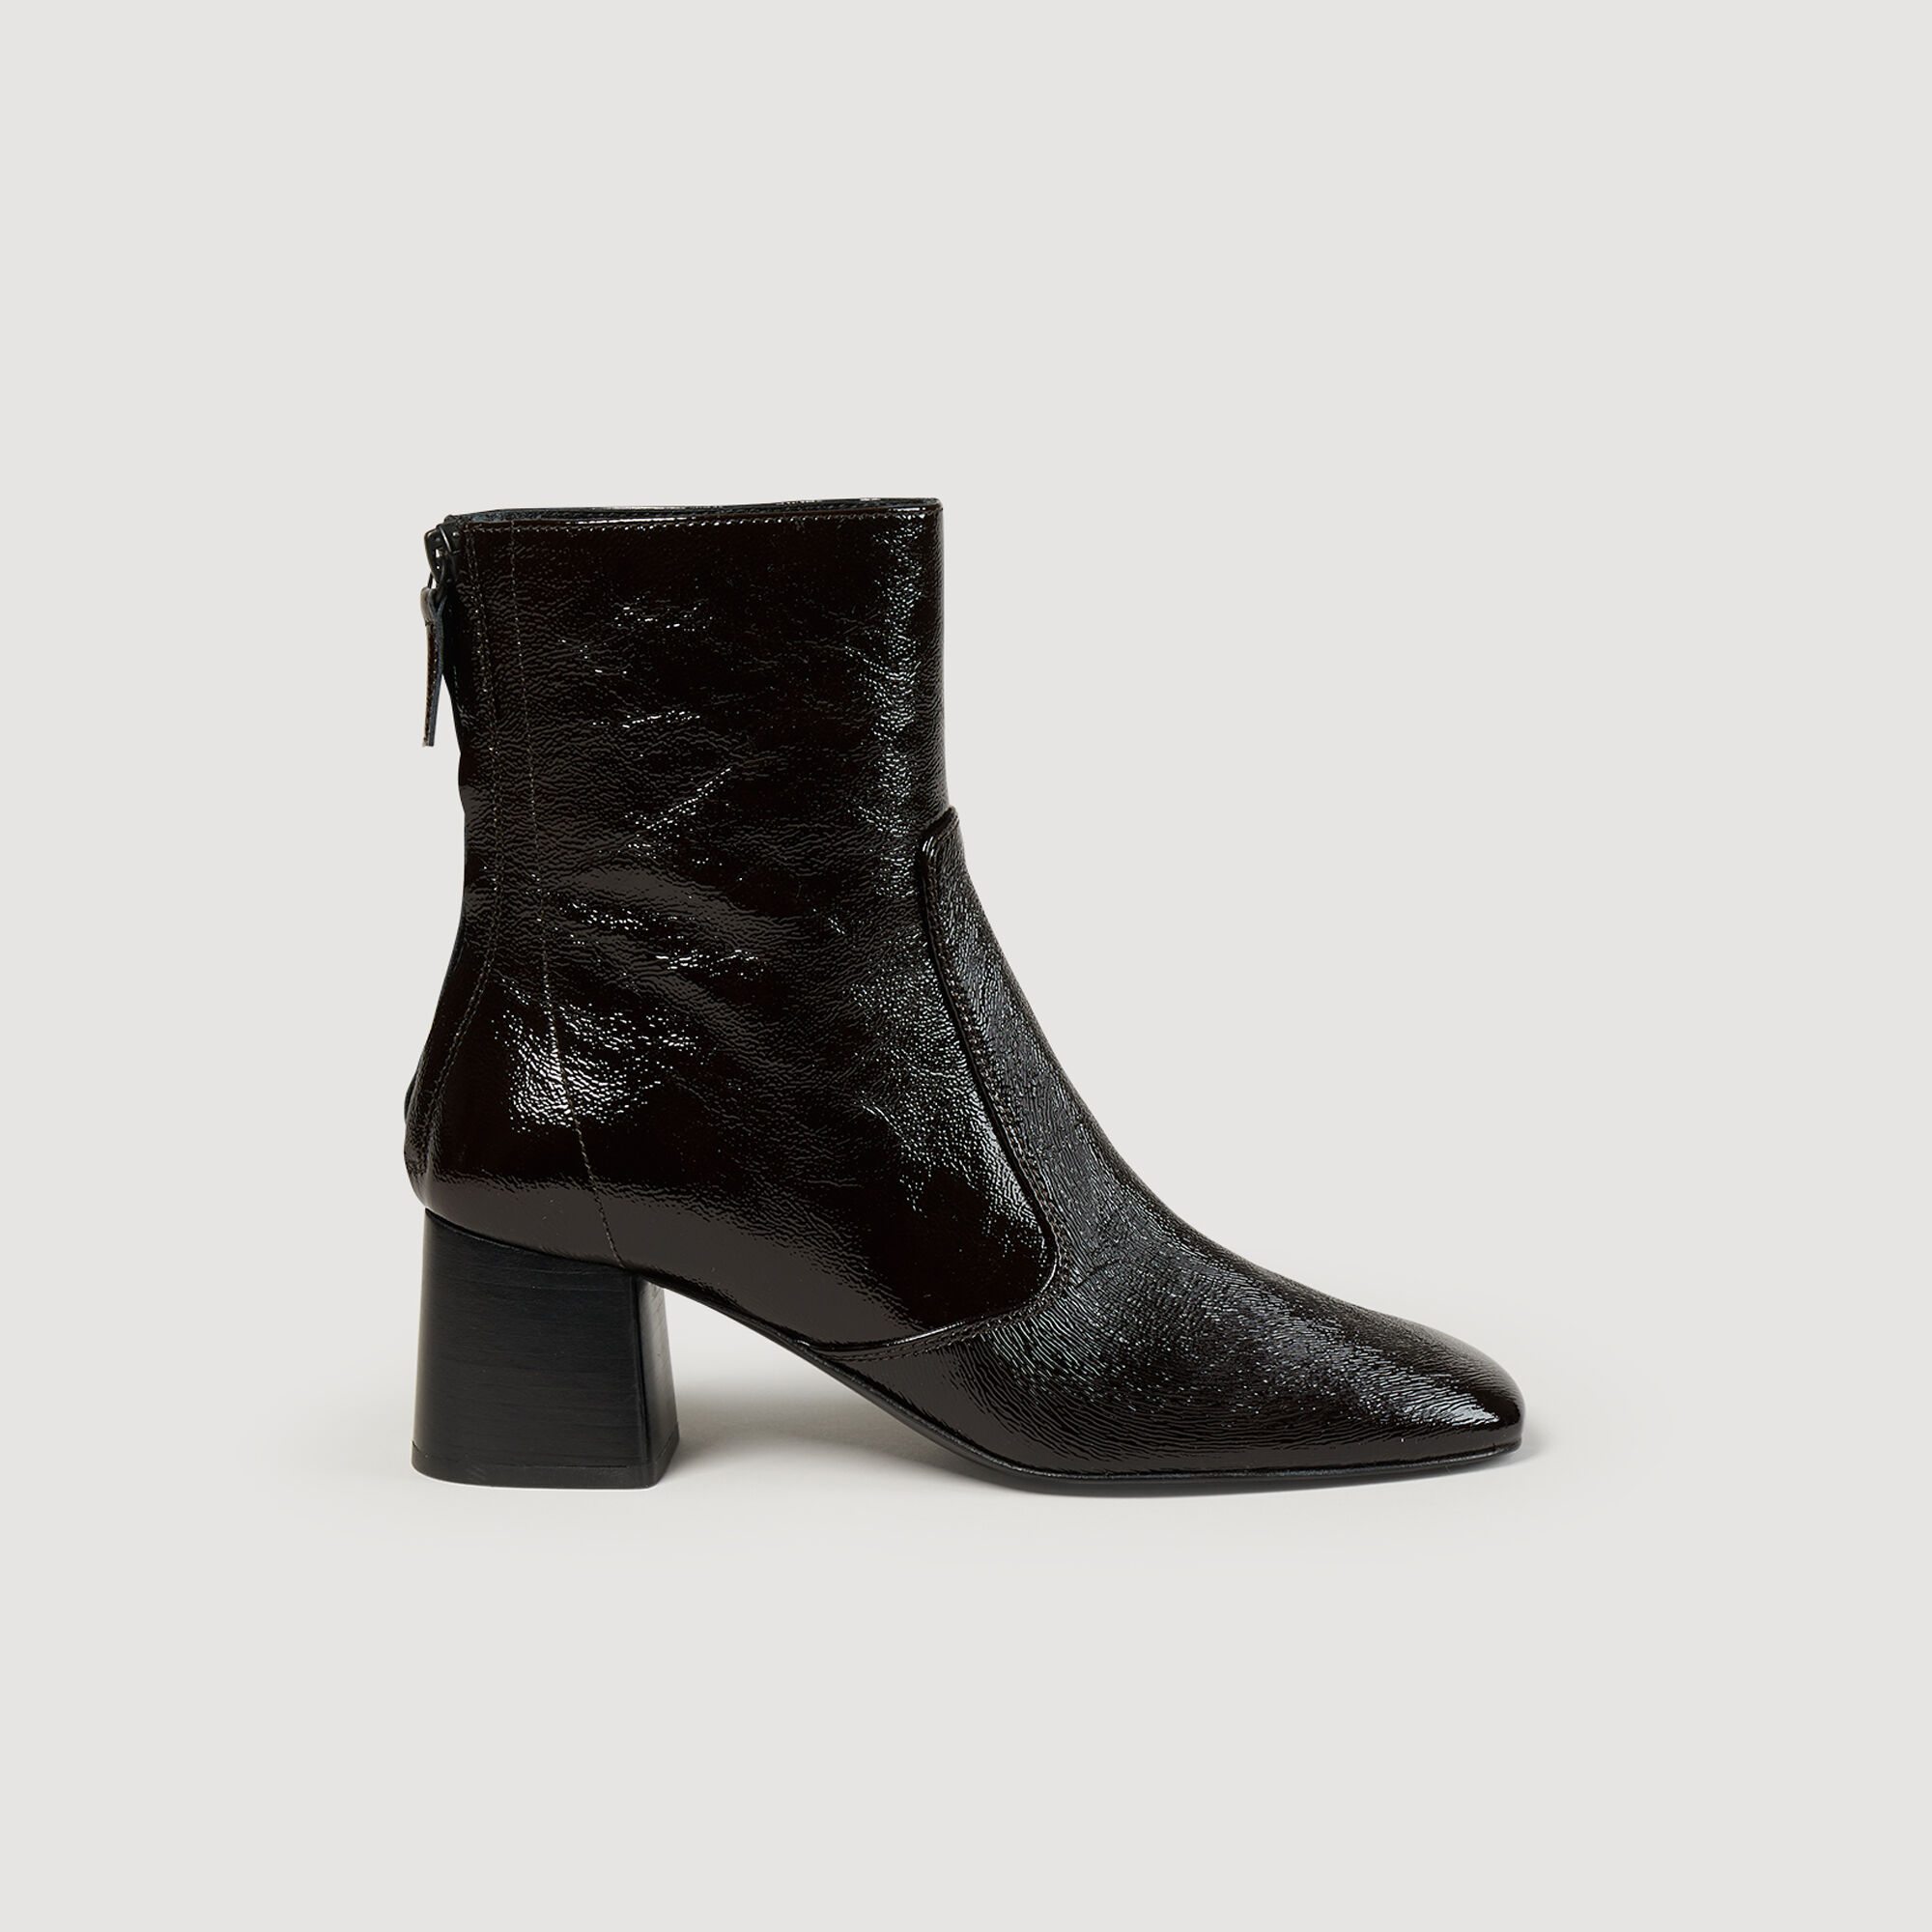 L'Artiste by Spring Step Heeled Ankle Boots - Bestlove - QVC.com